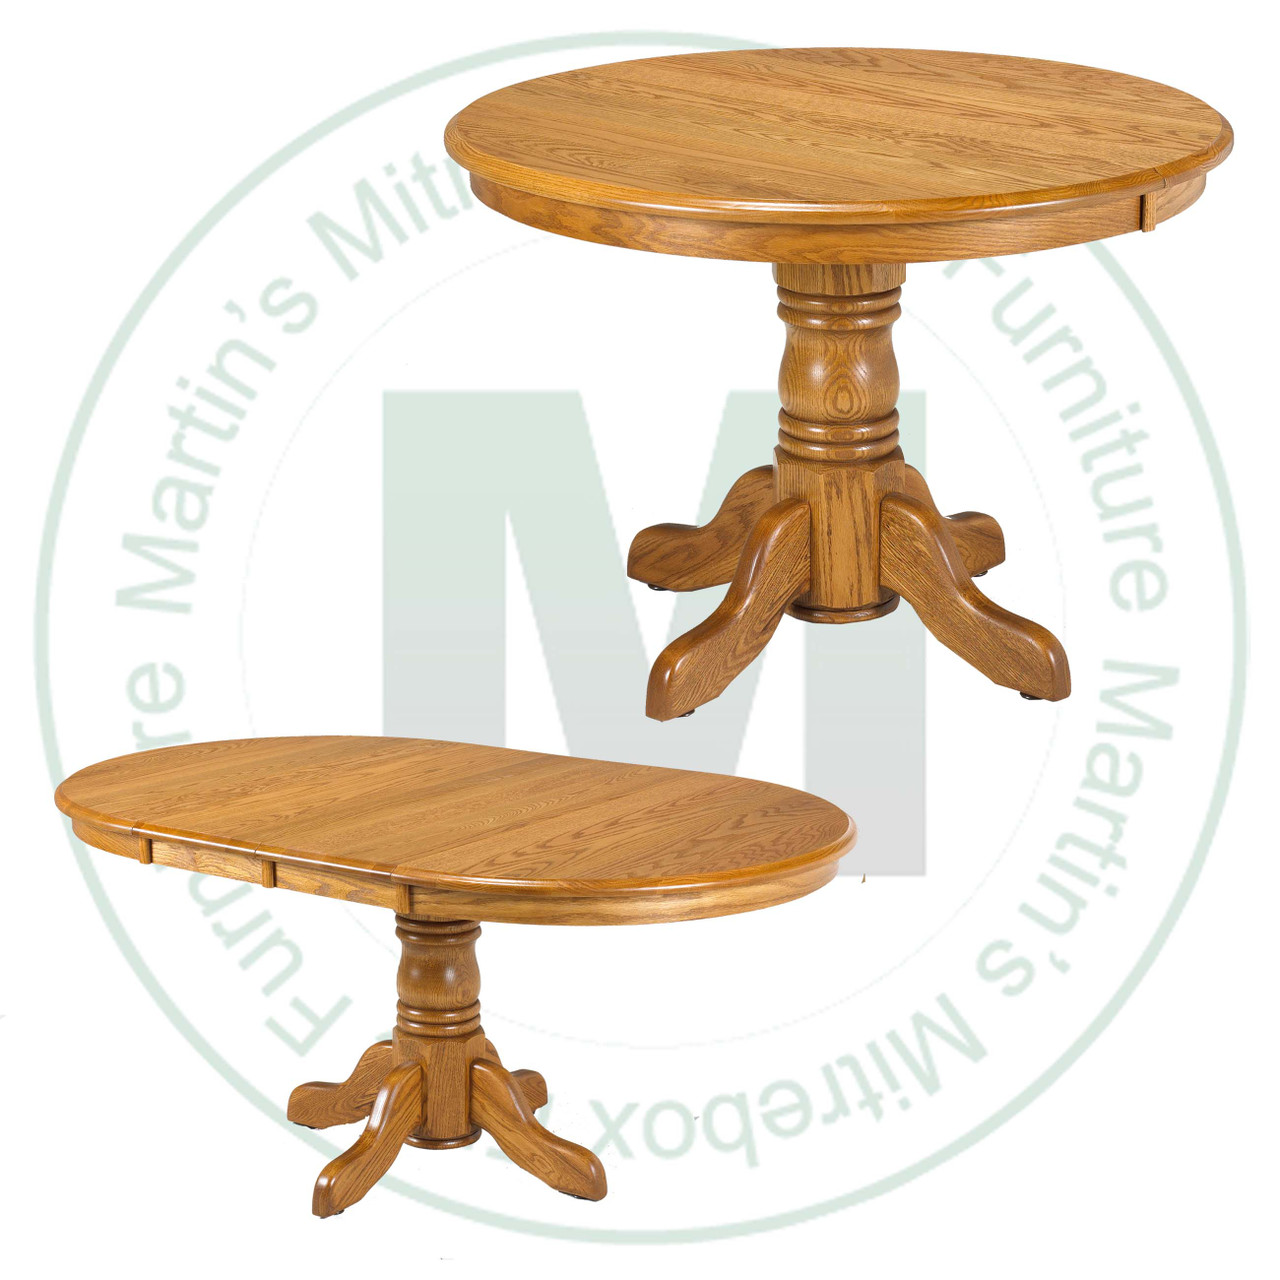 Oak Lancaster Collection Single Pedestal Table 36''D x 42''W x 30''H With 1 - 12'' Leaf. Table Has 1'' Thick Top